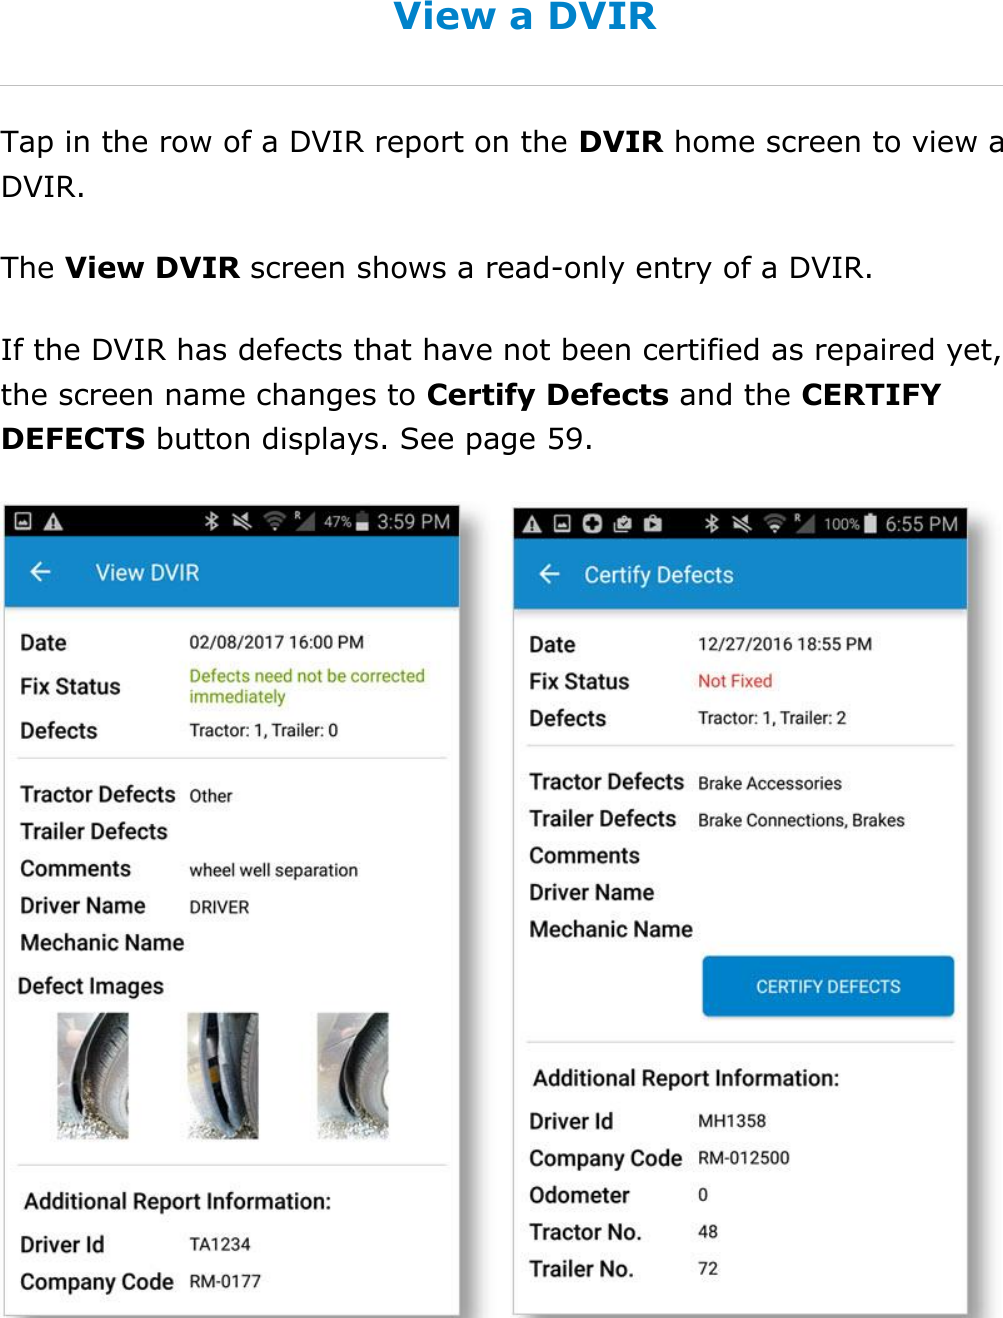 Complete a DVIR DriverConnect User Guide  58 © 2017, Rand McNally, Inc. View a DVIR Tap in the row of a DVIR report on the DVIR home screen to view a DVIR. The View DVIR screen shows a read-only entry of a DVIR. If the DVIR has defects that have not been certified as repaired yet, the screen name changes to Certify Defects and the CERTIFY DEFECTS button displays. See page 59.    